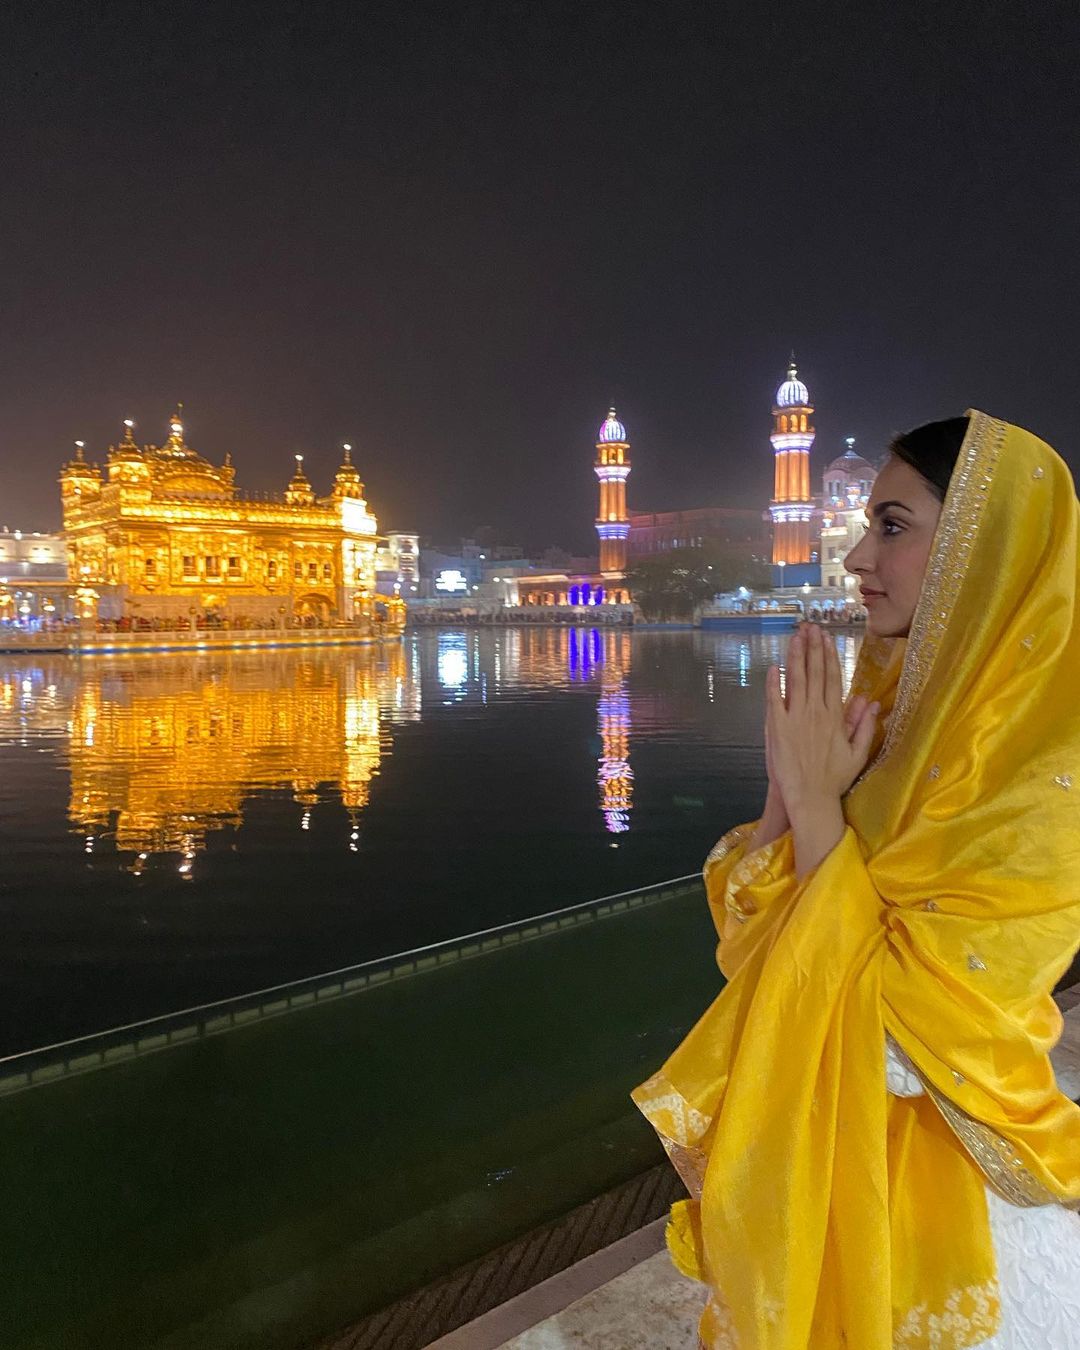 Kiara Advani looks divine in the yellow dupatta while visiting the Golden Temple.  